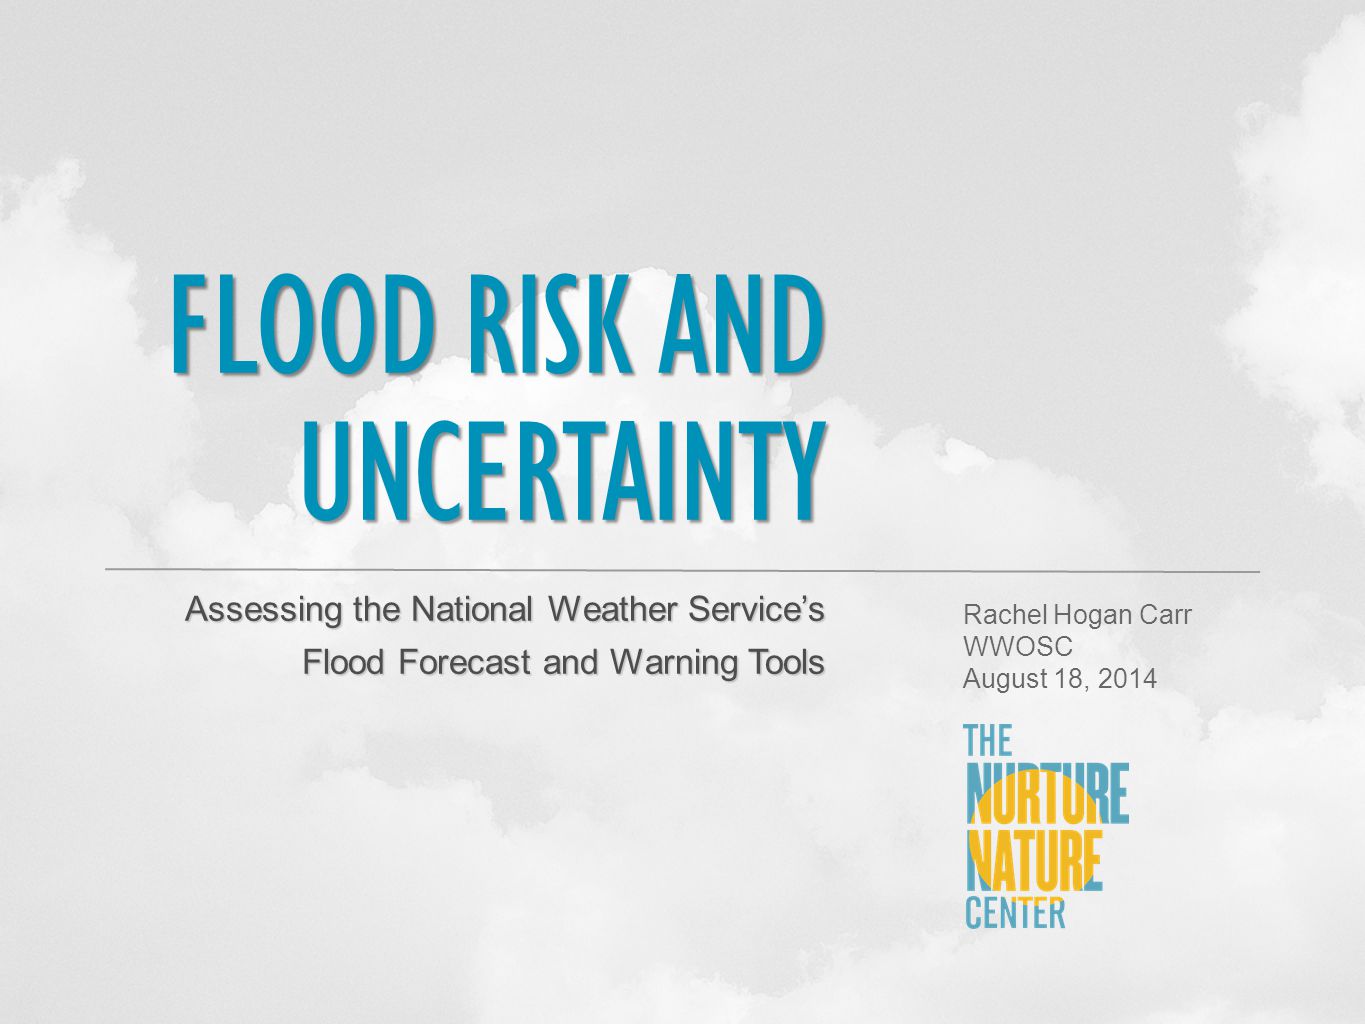 FLOOD RISK AND UNCERTAINTY Assessing the National Weather Service’s Flood Forecast and Warning Tools Rachel Hogan Carr WWOSC August 18, 2014